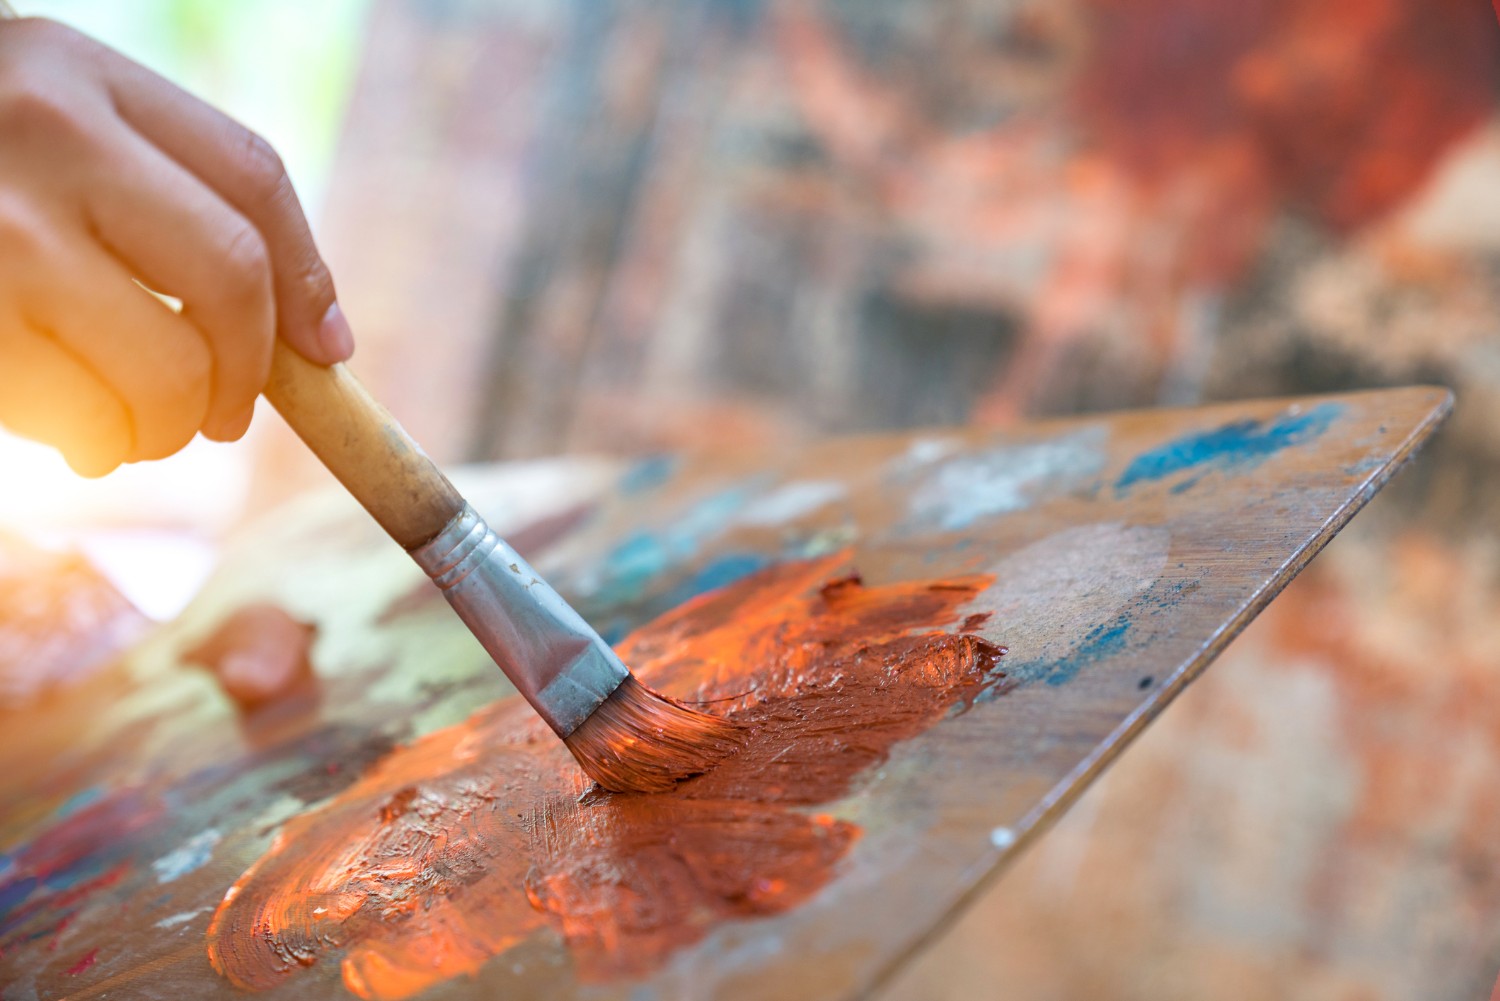 Paintbrush running along a canvas, held gently with brown and orange paint smearing from it.